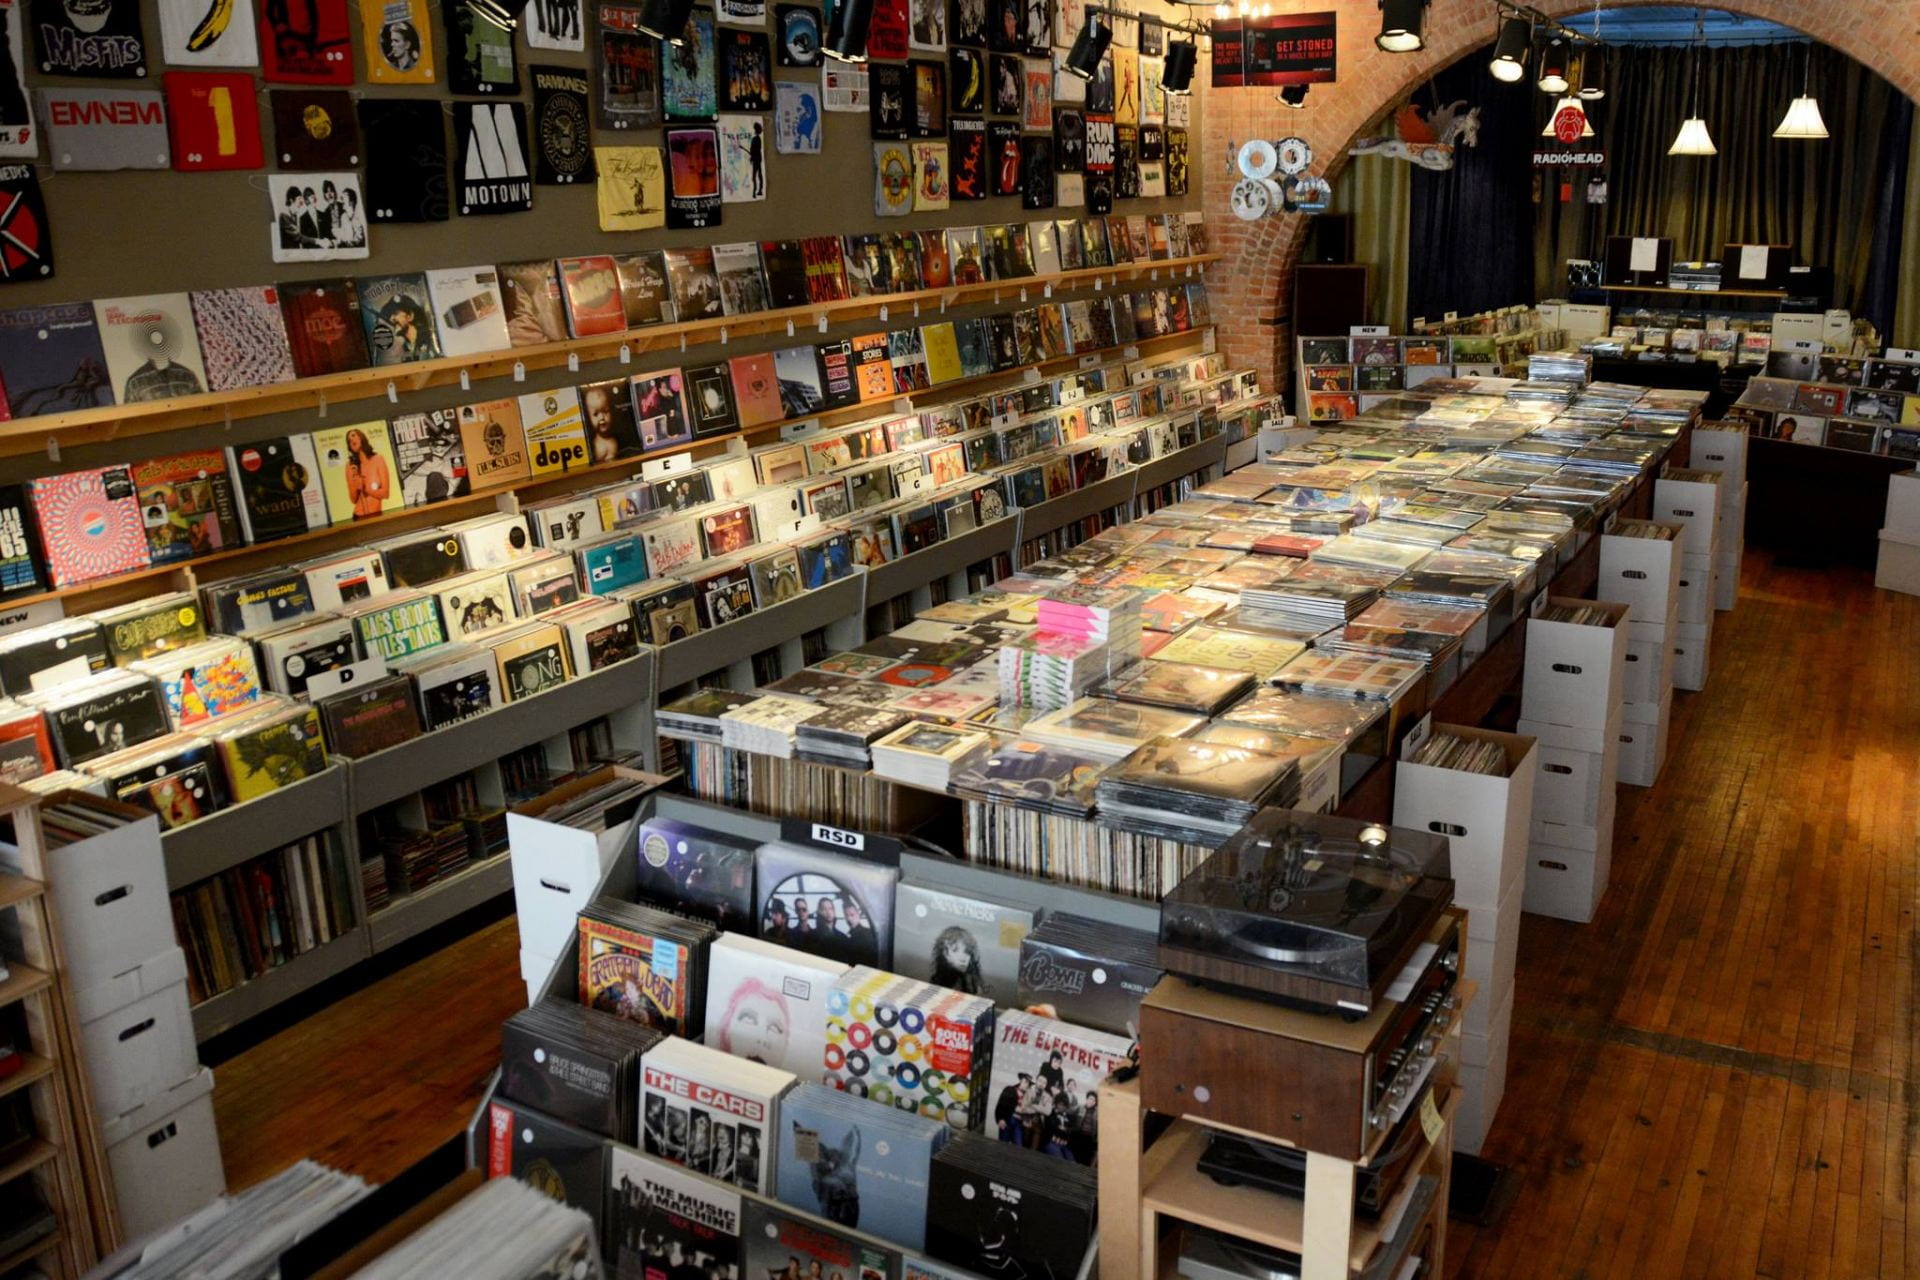 Breaking records: Vinyl sales pass CD sales for the first time since 1980s